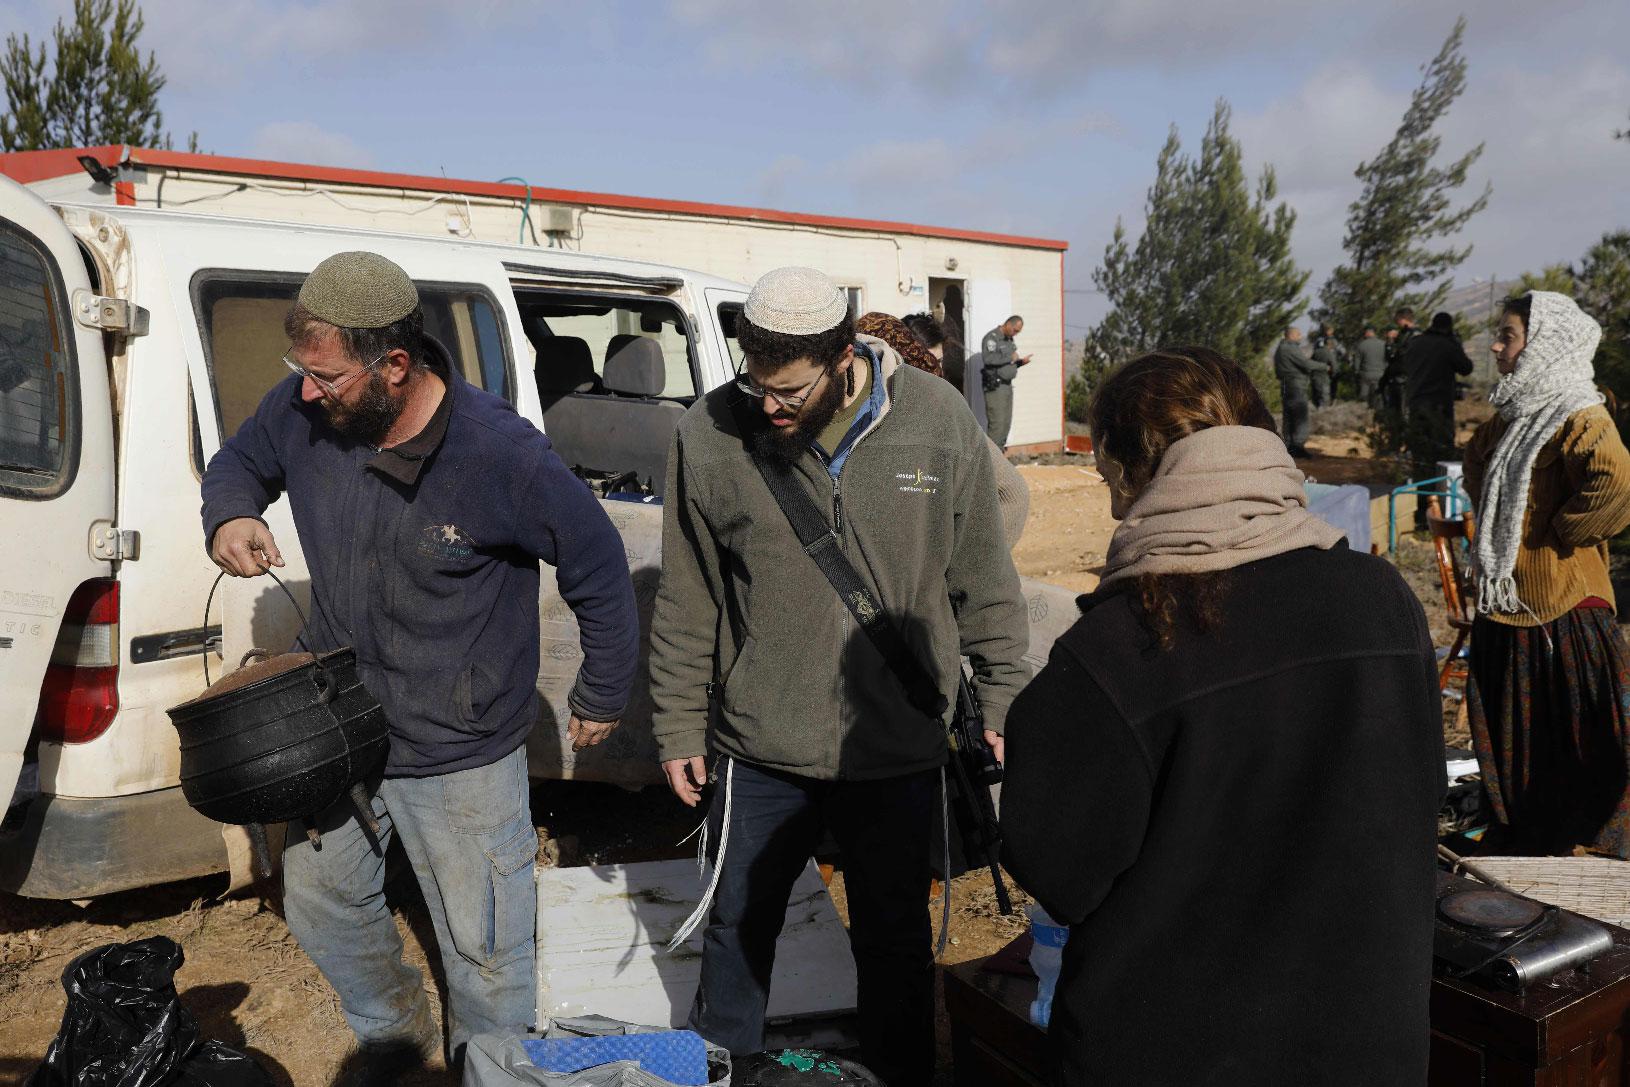 Israeli settlers move their belongings outside a caravan they had brought to the former outpost of Amona near the Jewish settlement of Ofra, following clashes with security forces as dozens of settlers were evicted early on January 3, 2019.